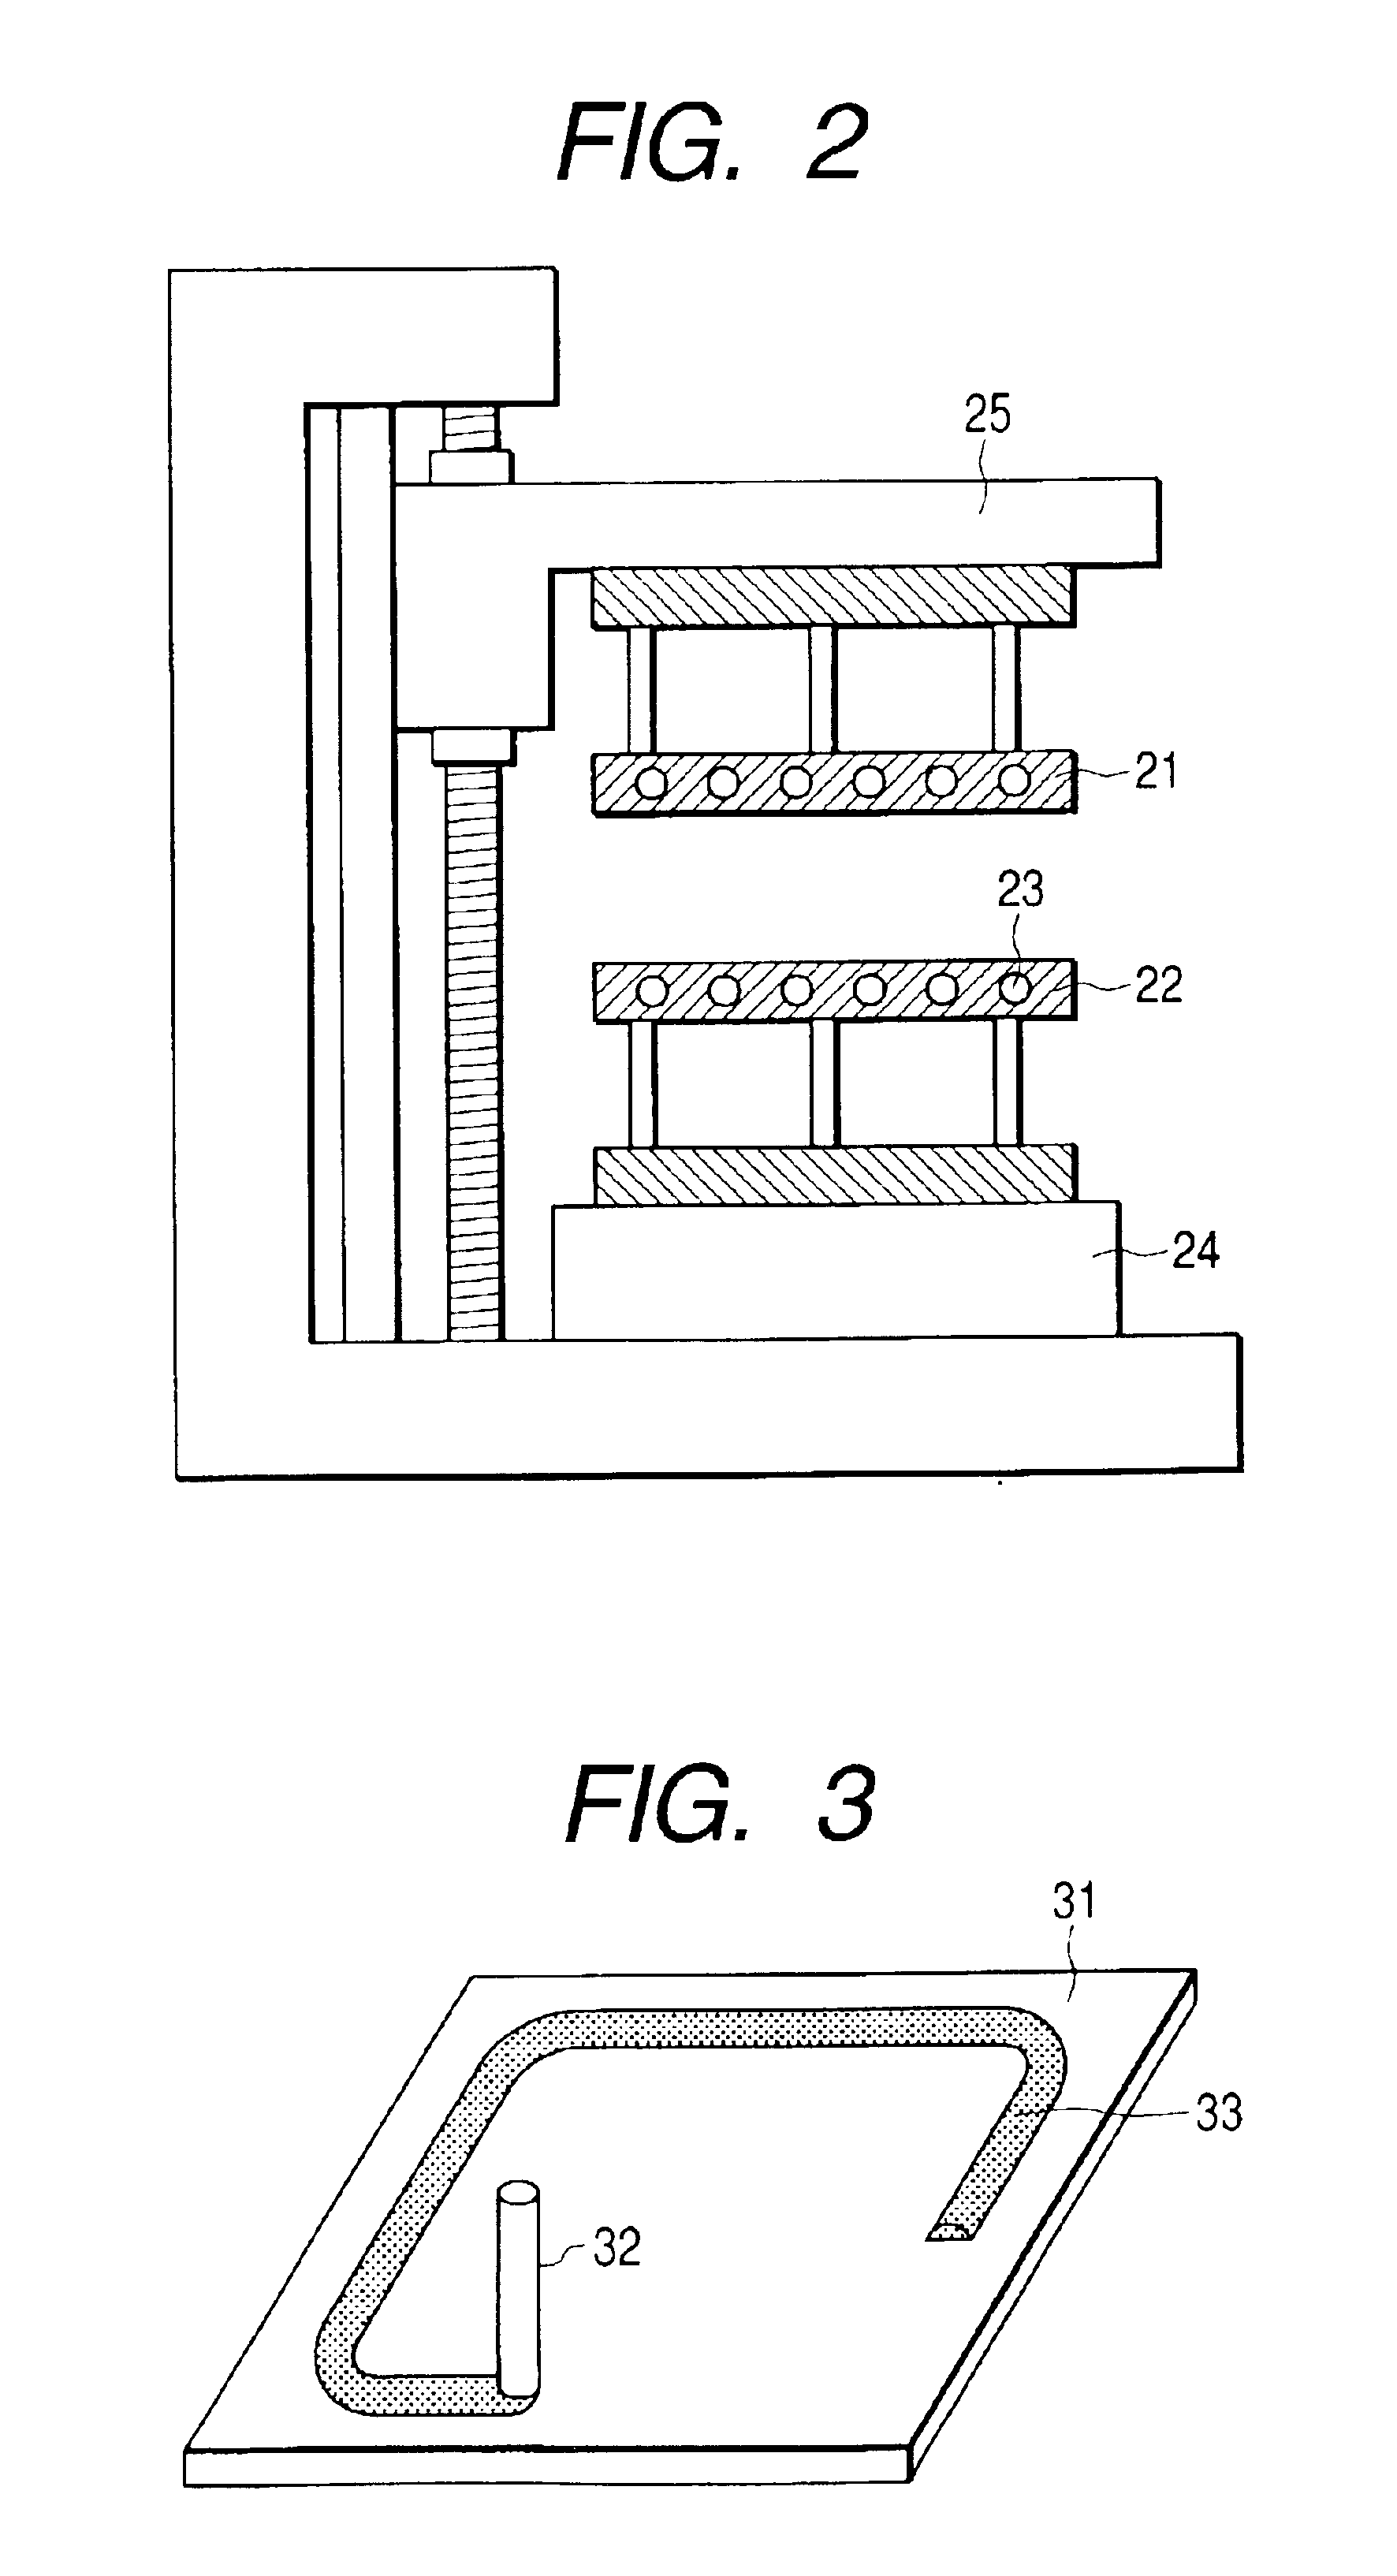 Method for fabricating vacuum container and method for fabricating image-forming apparatus using the vacuum container